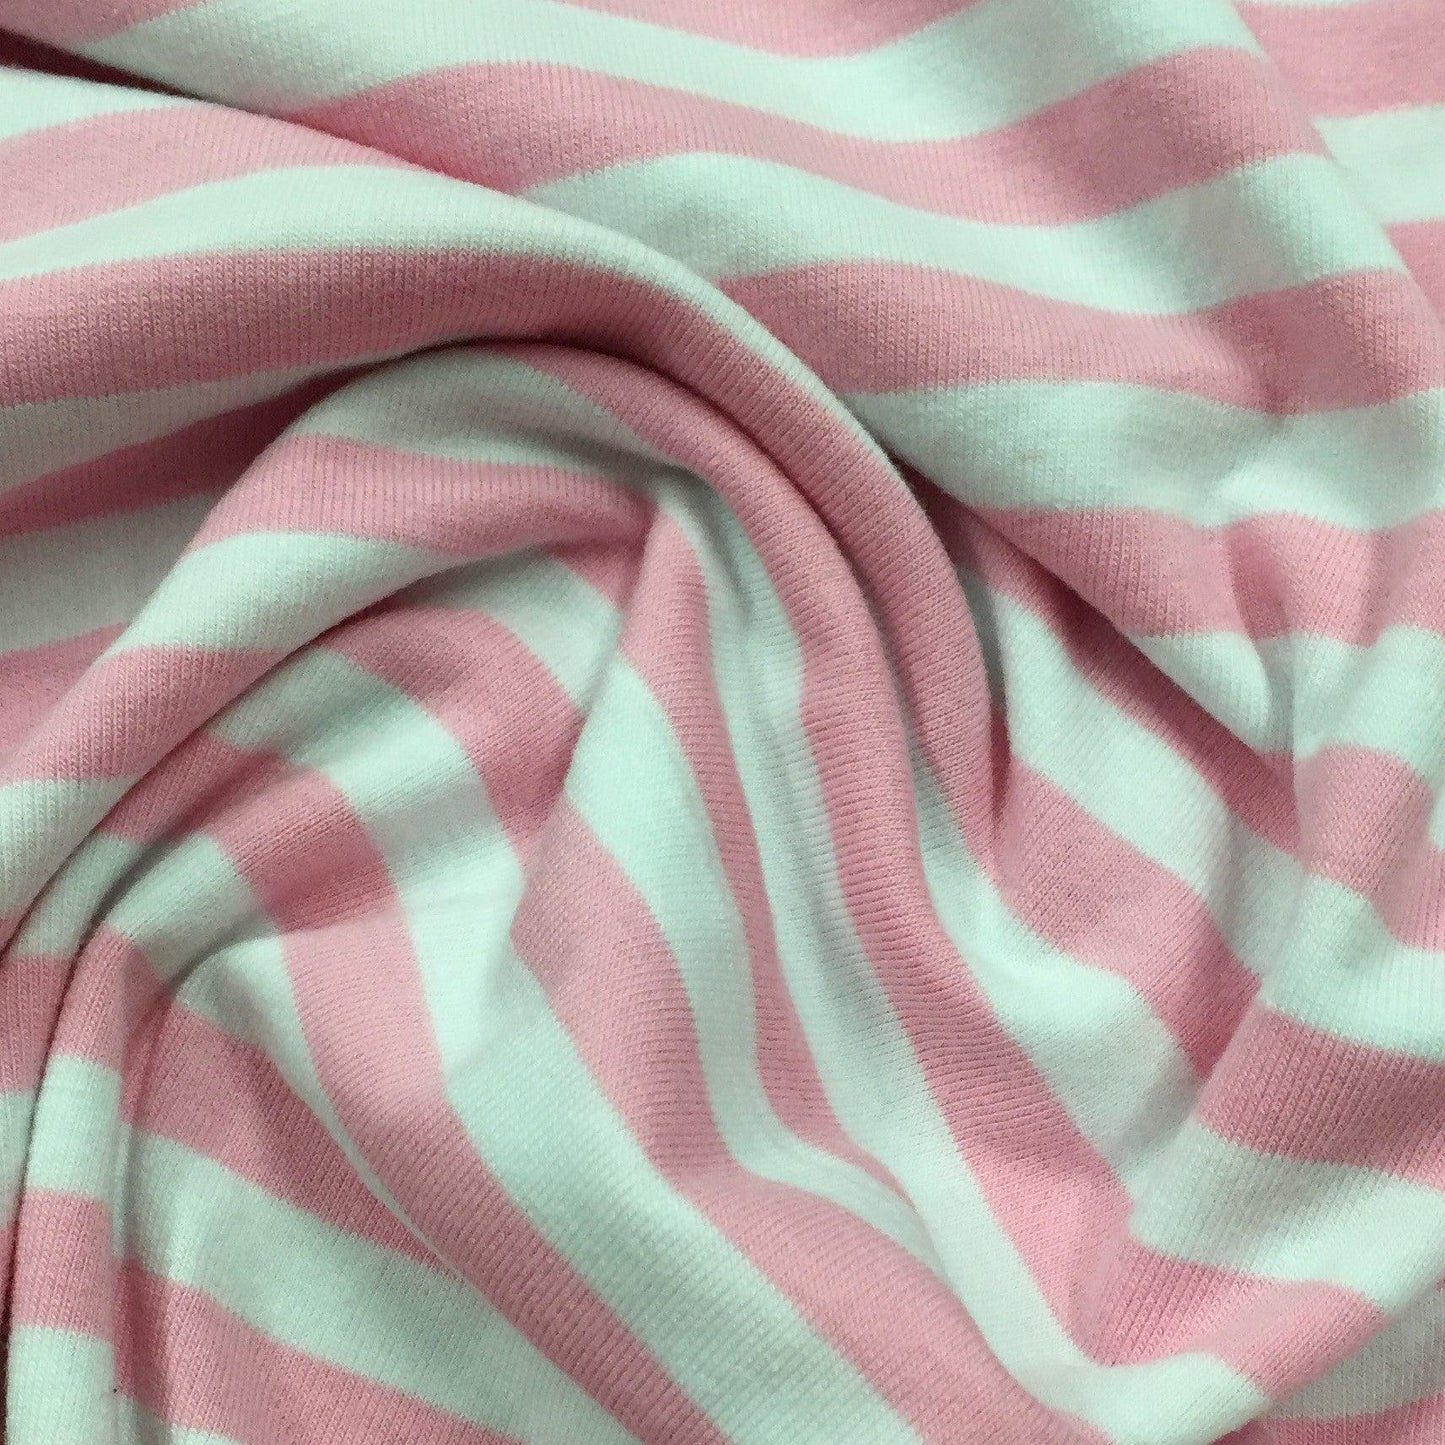 Pink and White 3/8" Stripes on Cotton/Spandex Jersey